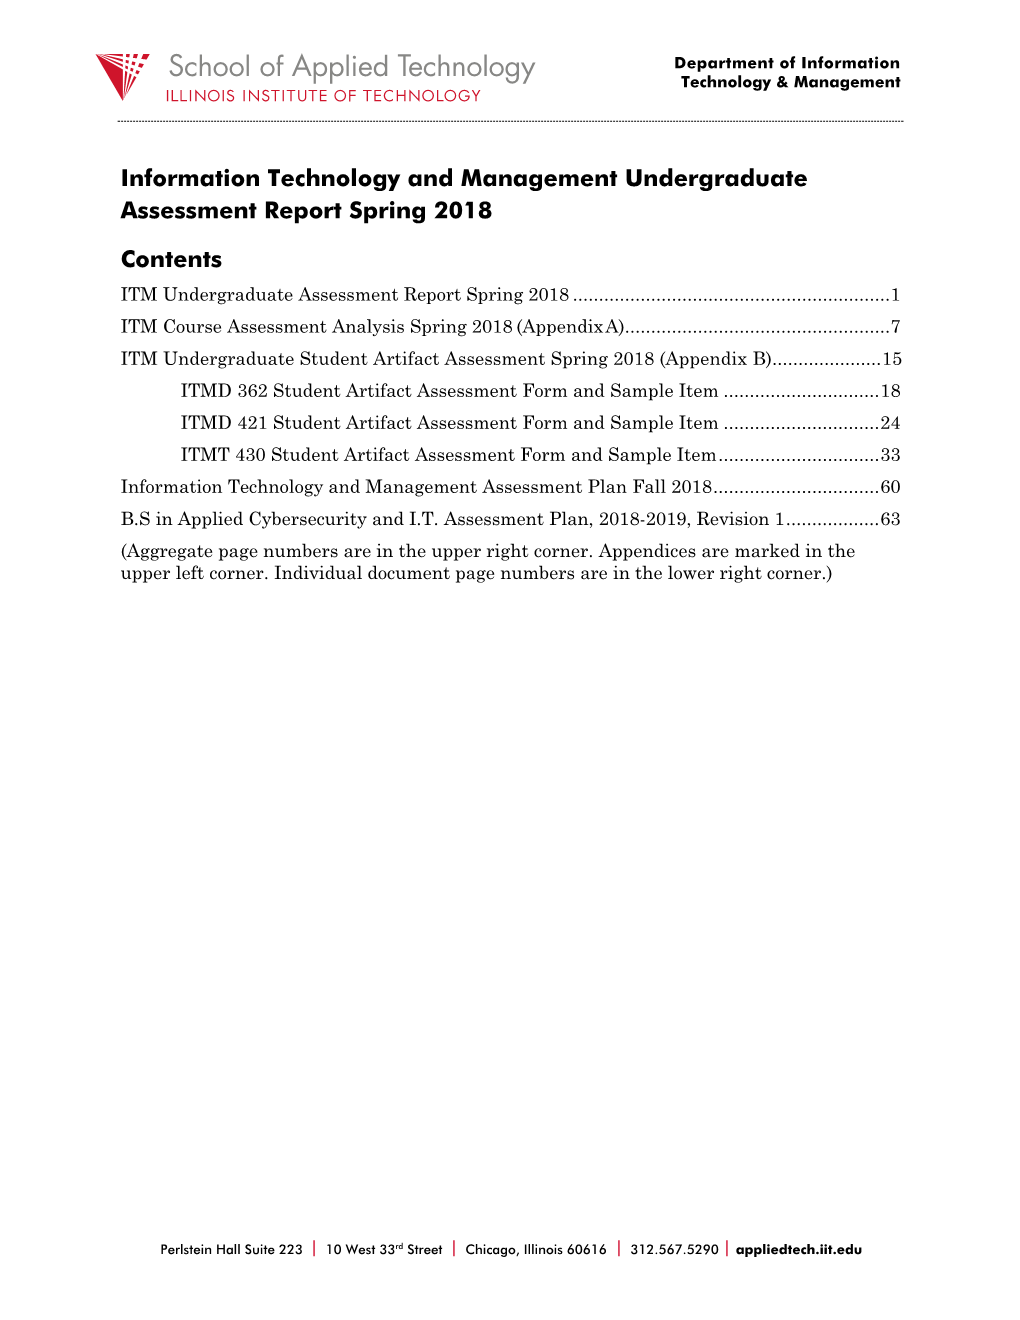 Information Technology and Management Undergraduate Assessment Report Spring 2018